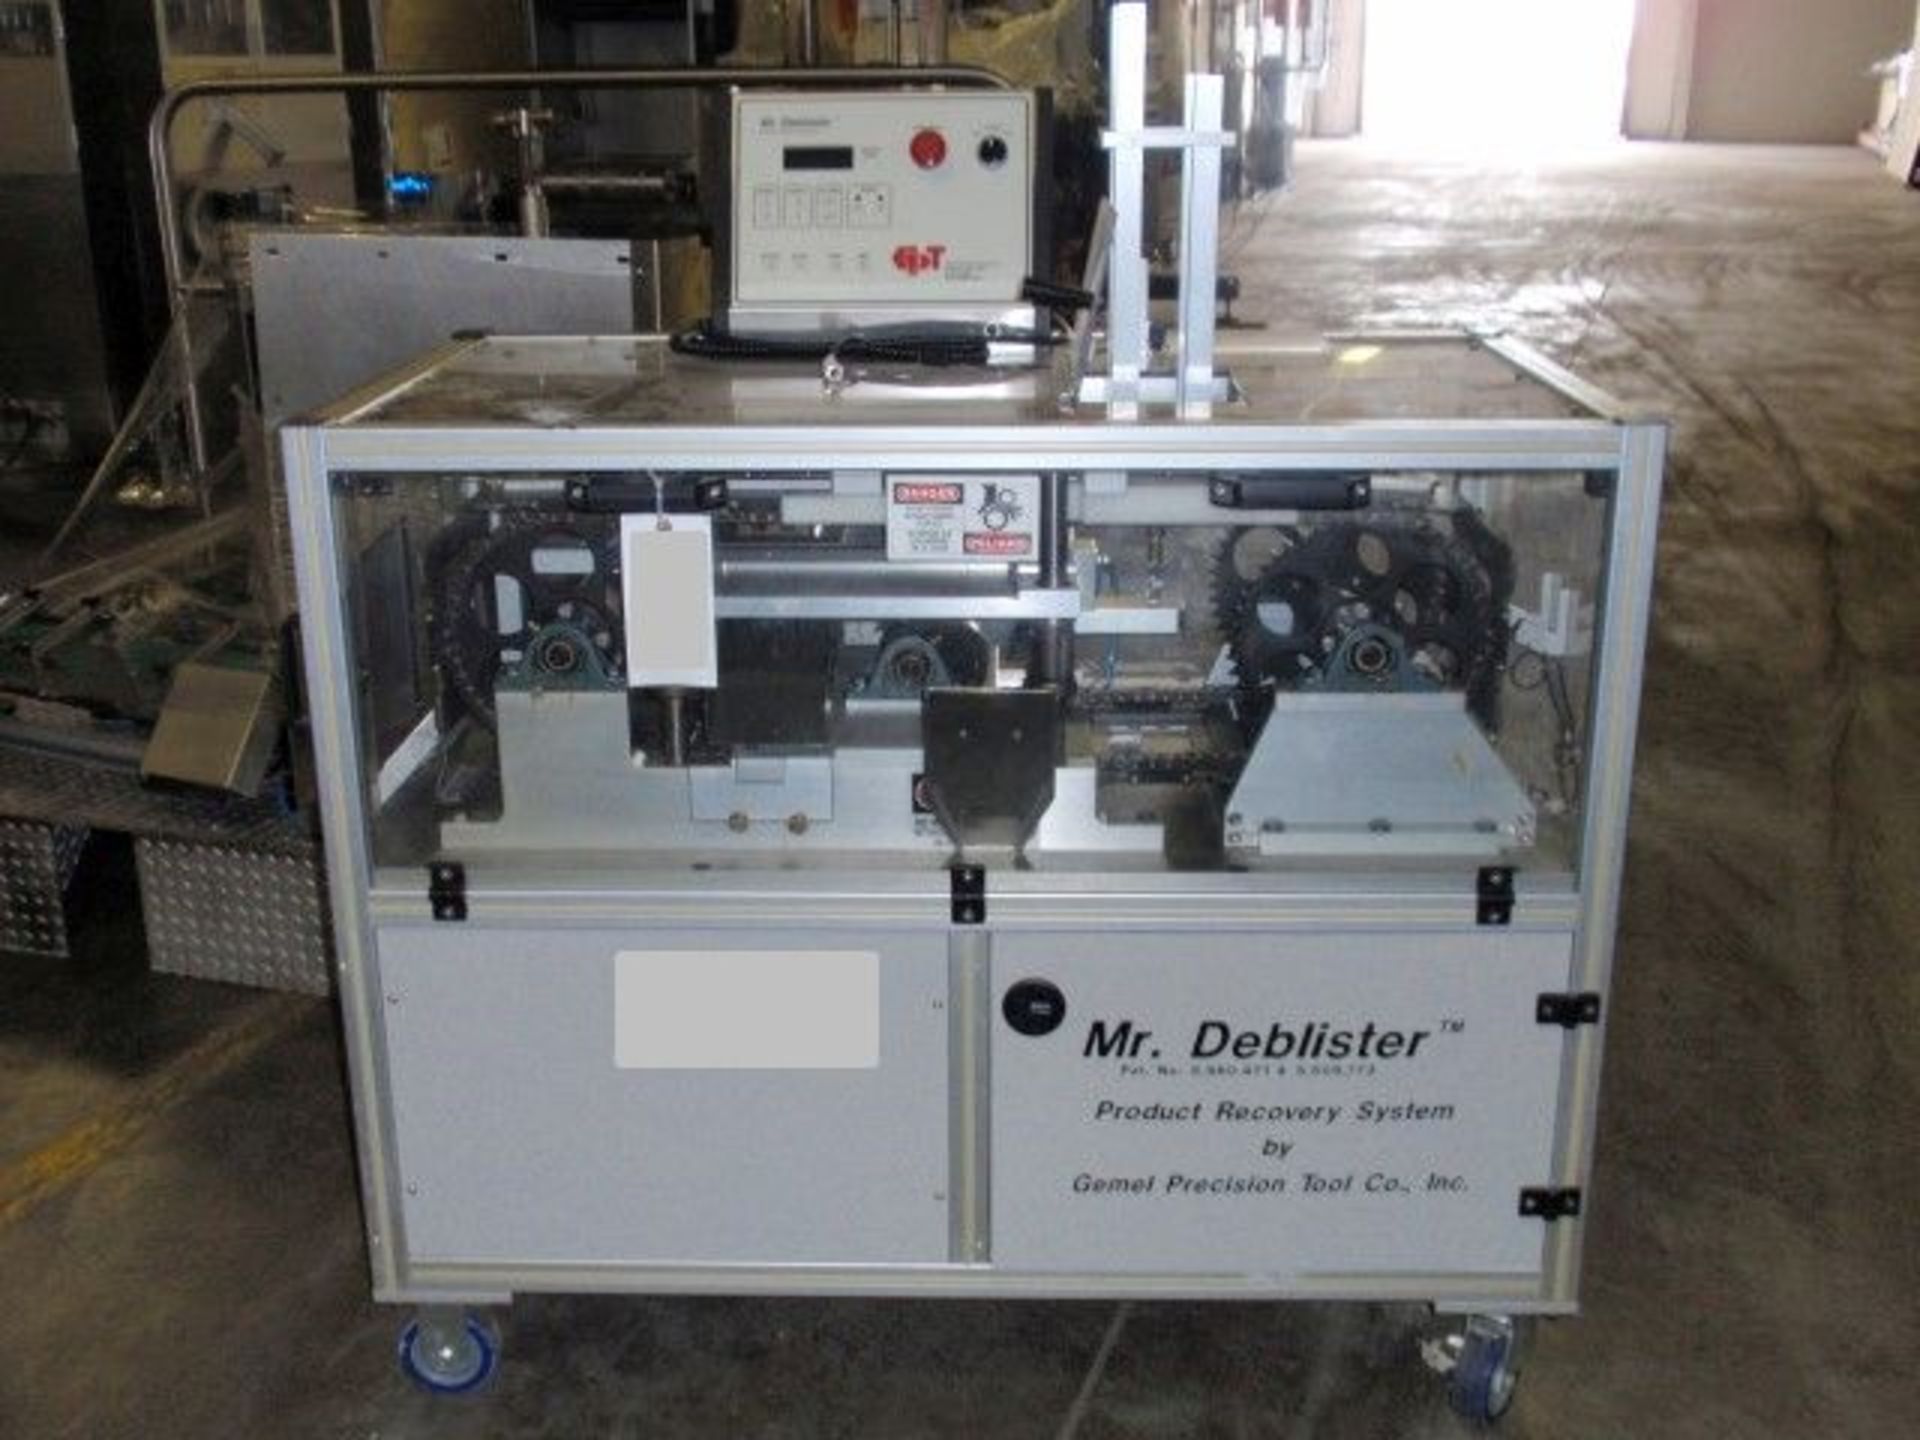 GEMEL MR. DEBLISTER MACHINE, RATED FOR UP TO 4800 CARDS PER HOUR